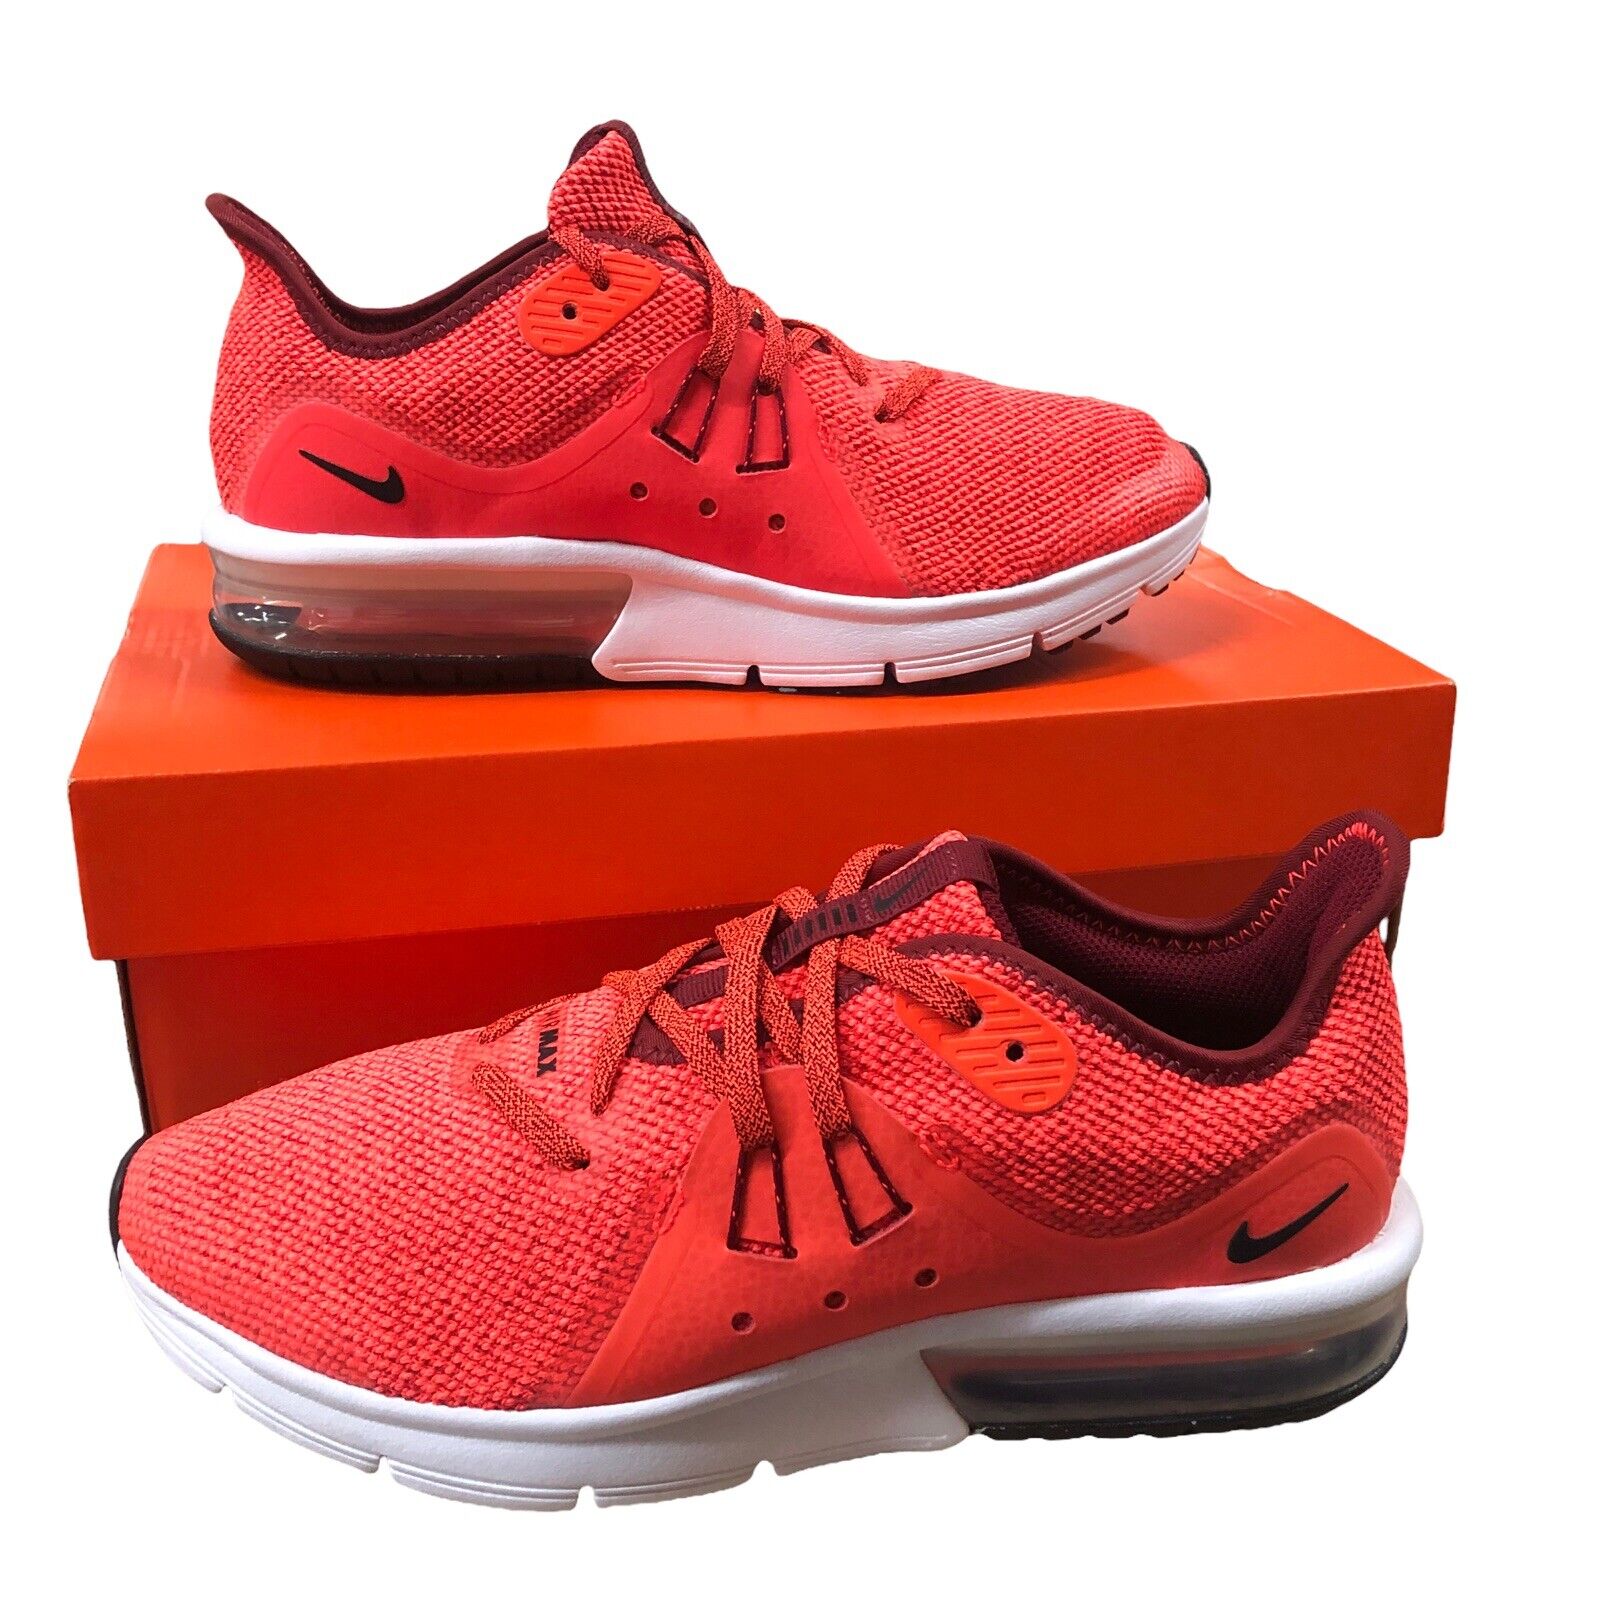 Nike Air Max Sequent 3 Kid's Youth Sneakers 922884-600 Orange Red 6.5 Y 8 US 888412646258 | eBay